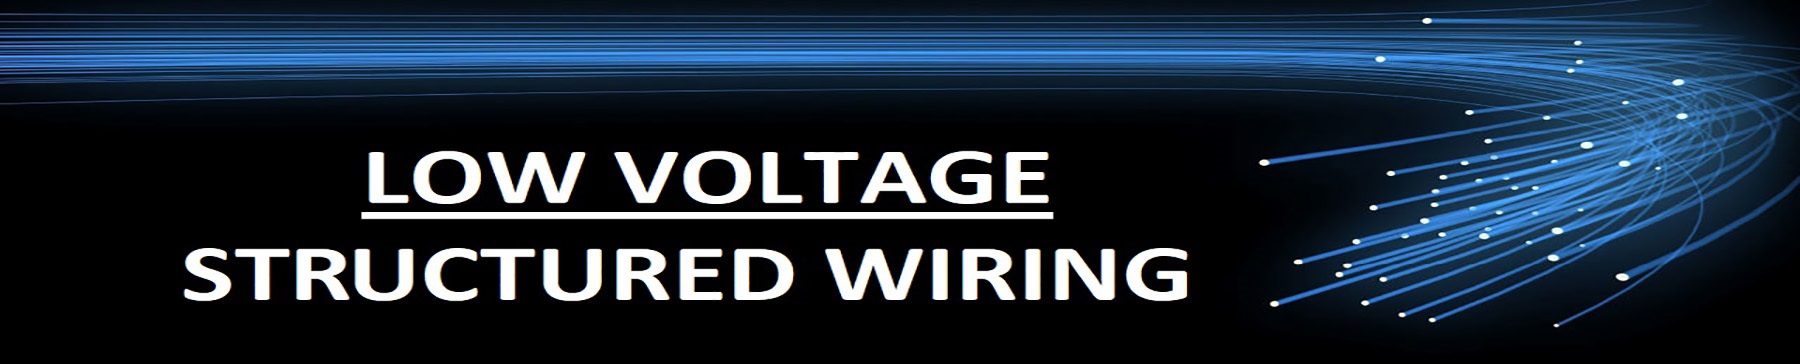 cat5, cat5e, cat6, and coax, Low Voltage | Structured Wiring